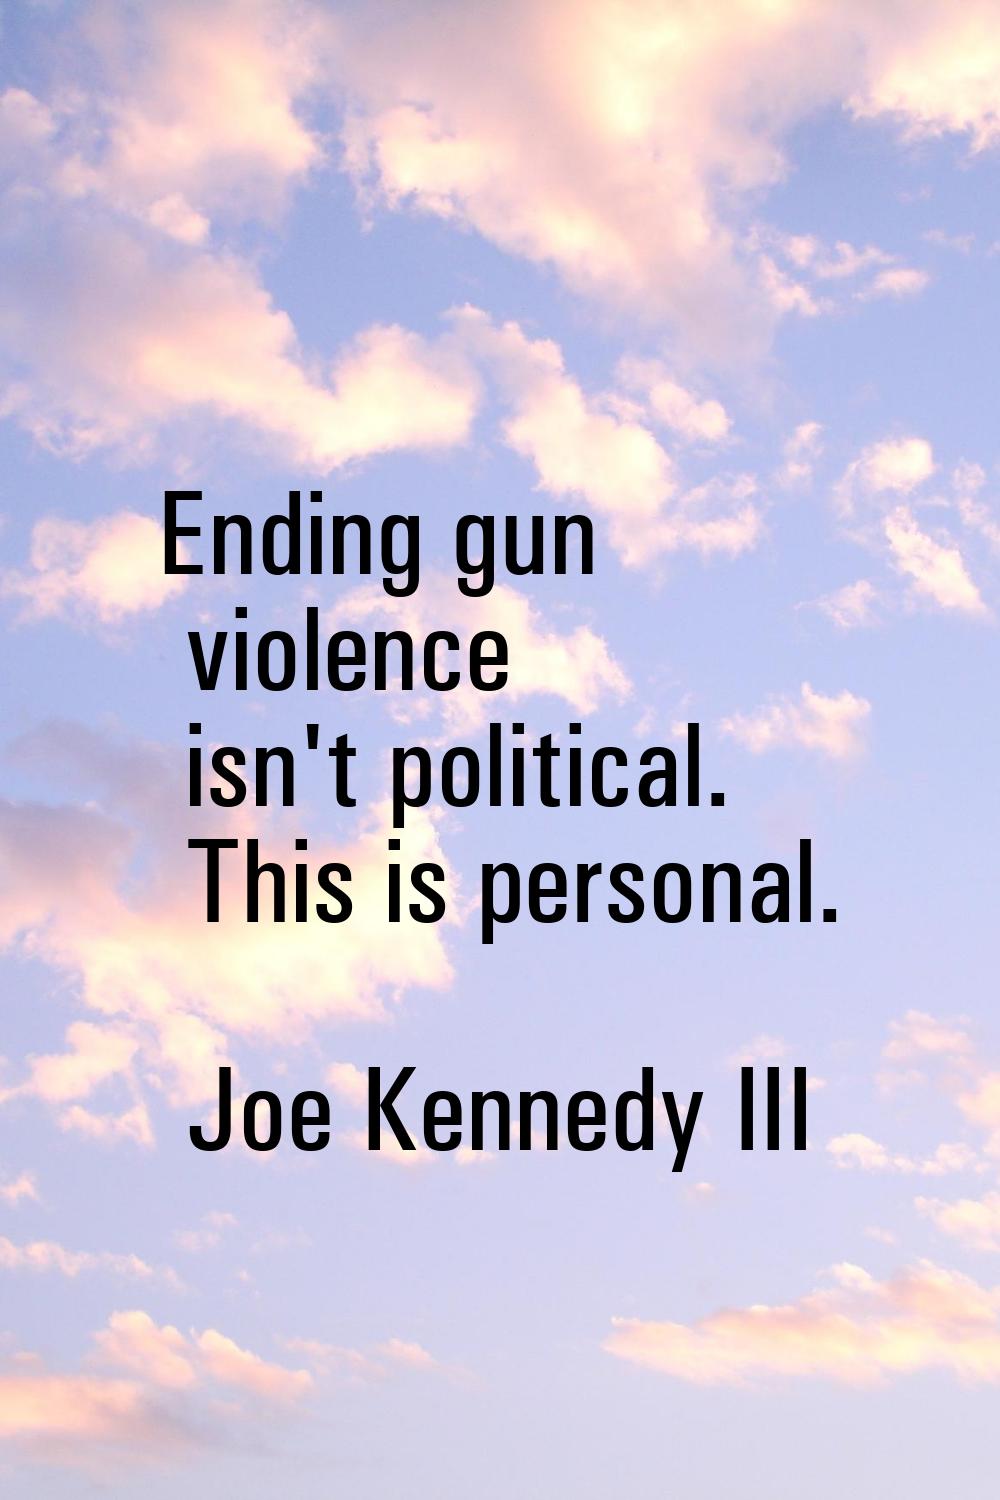 Ending gun violence isn't political. This is personal.